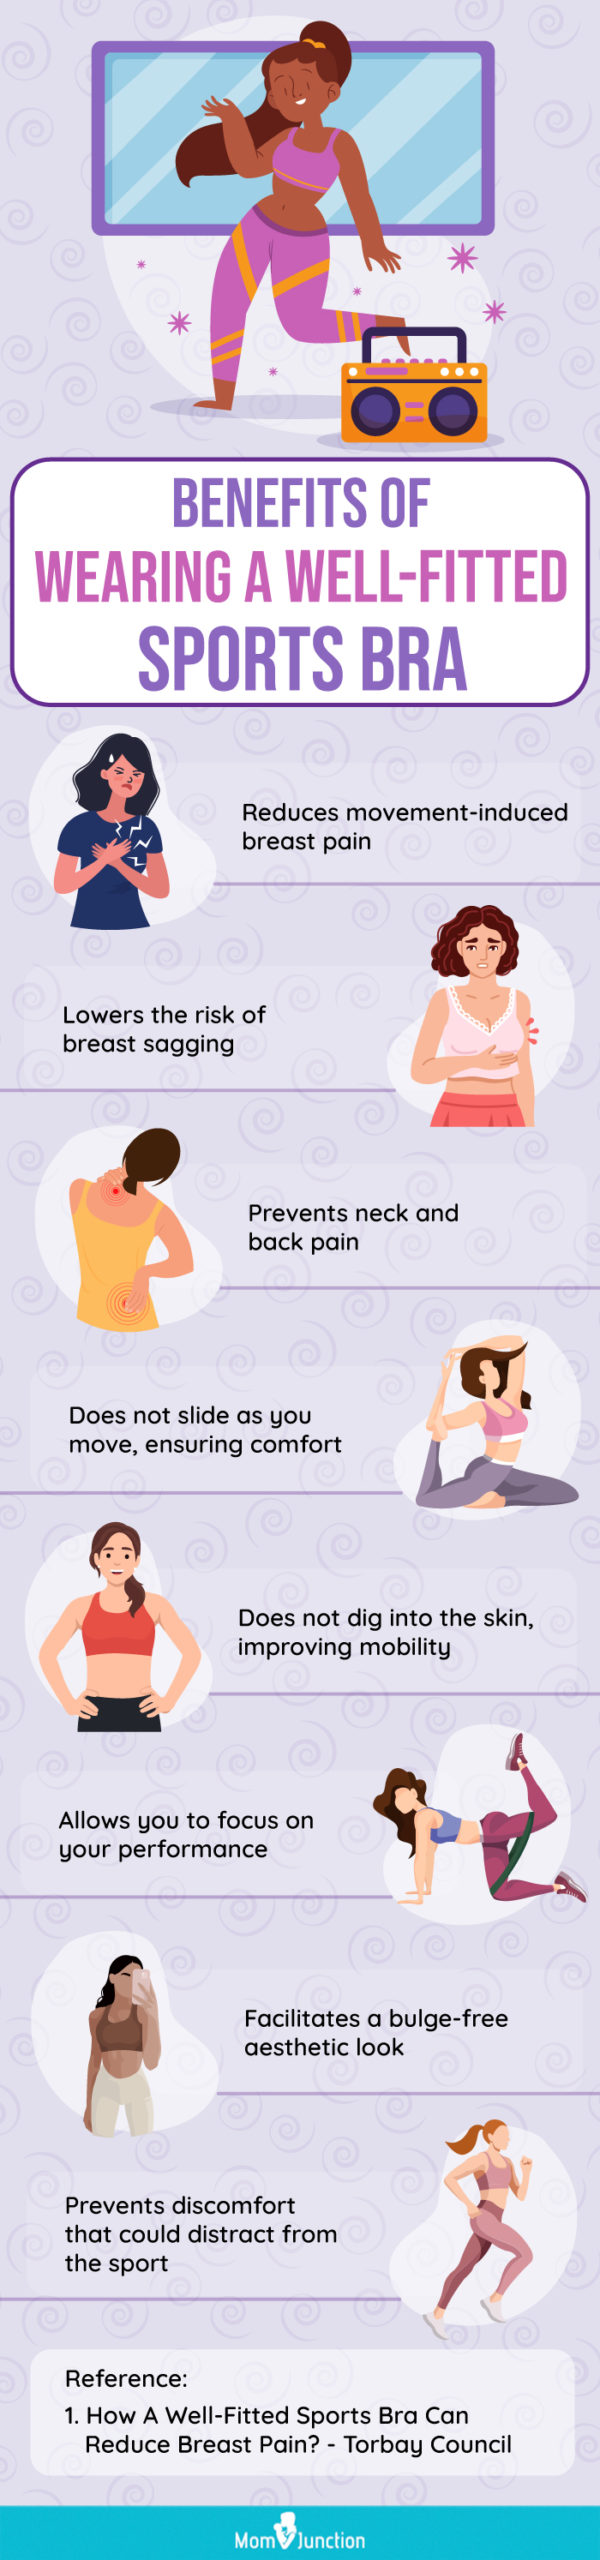 Benefits Of Wearing A Well Fitted Sports Bra (infographic)